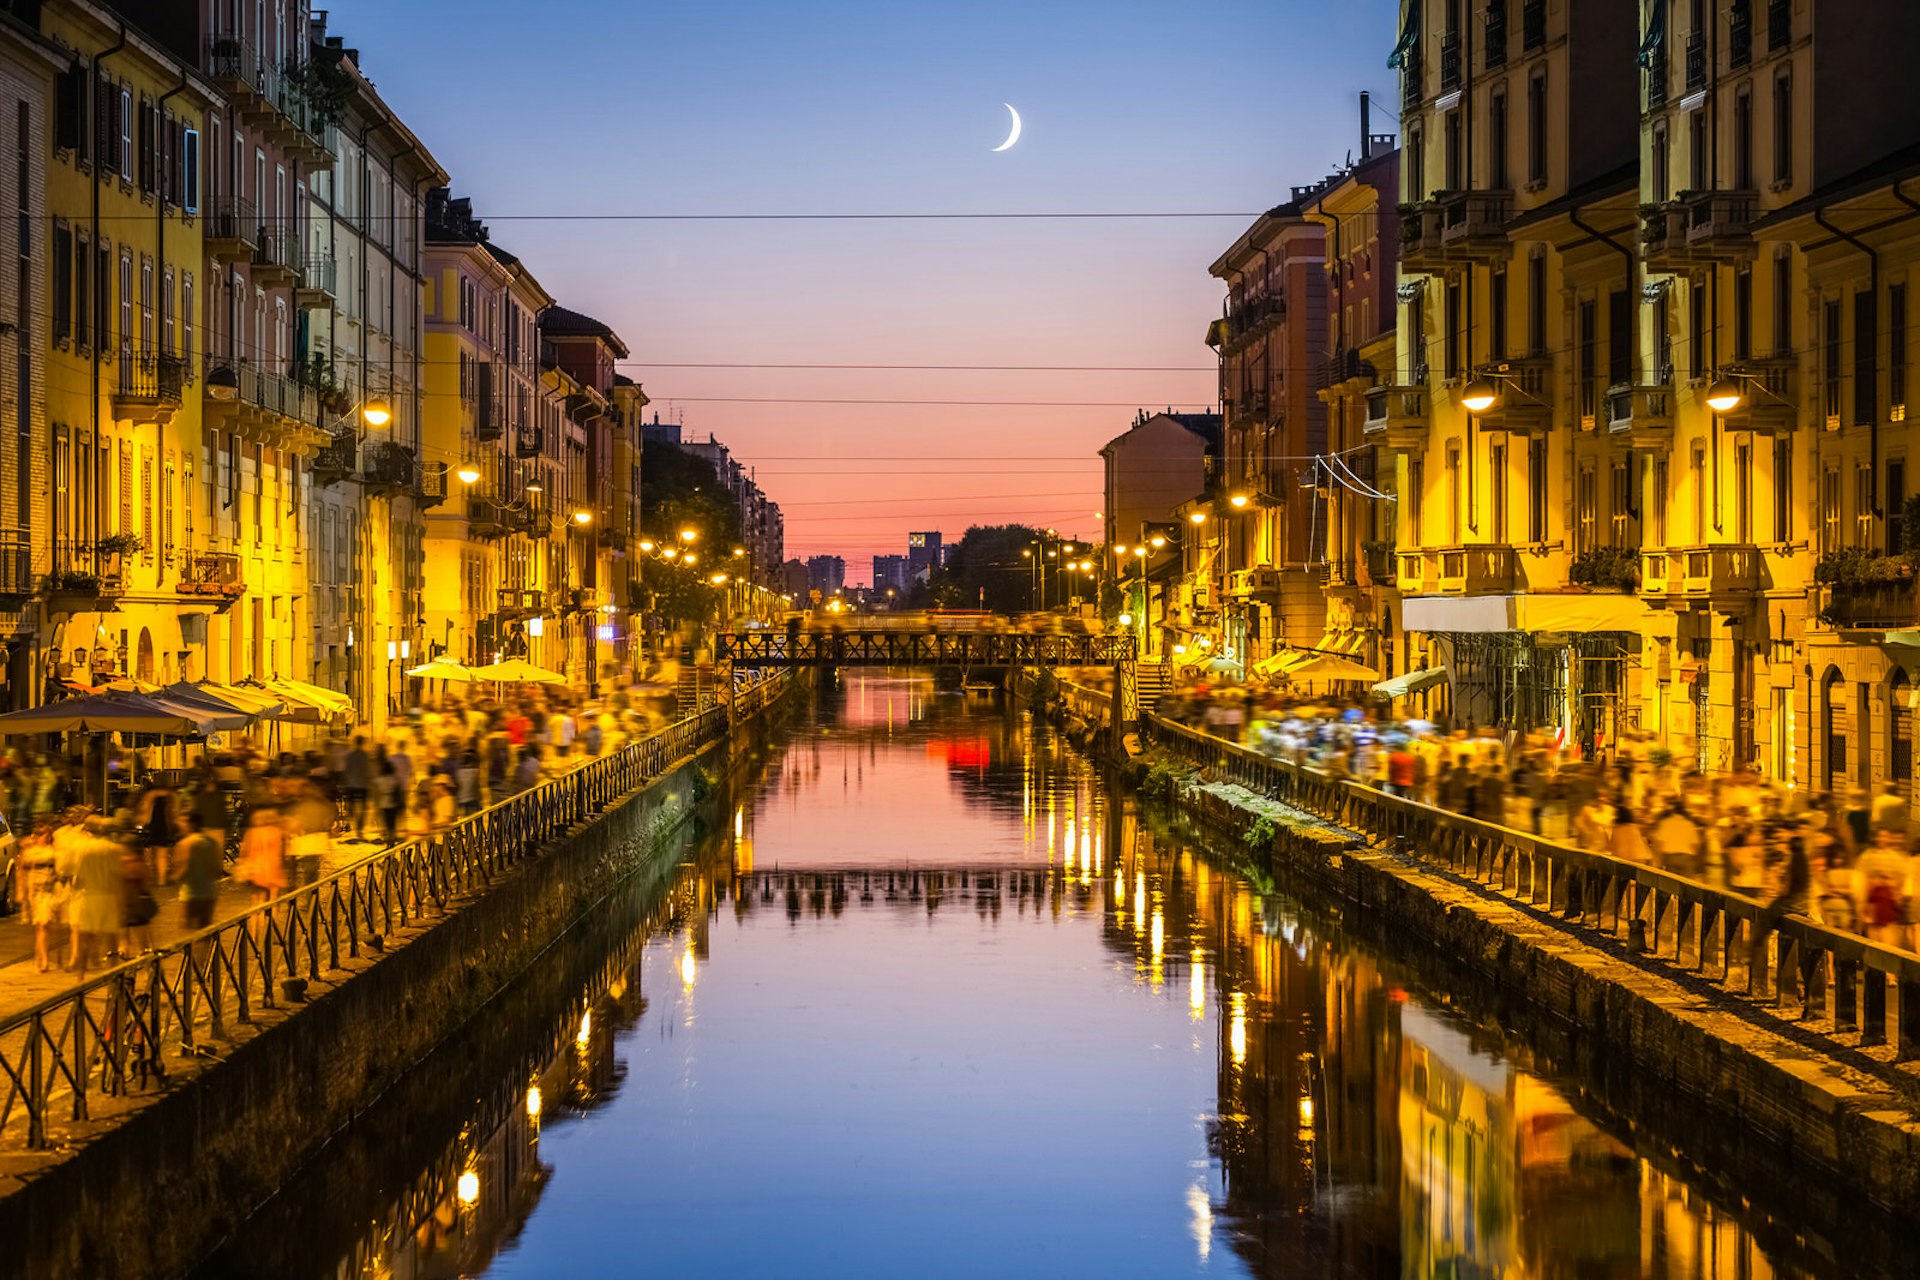 Sunset shot of a Navigli canal, with crowds of people walking down the streets on either side